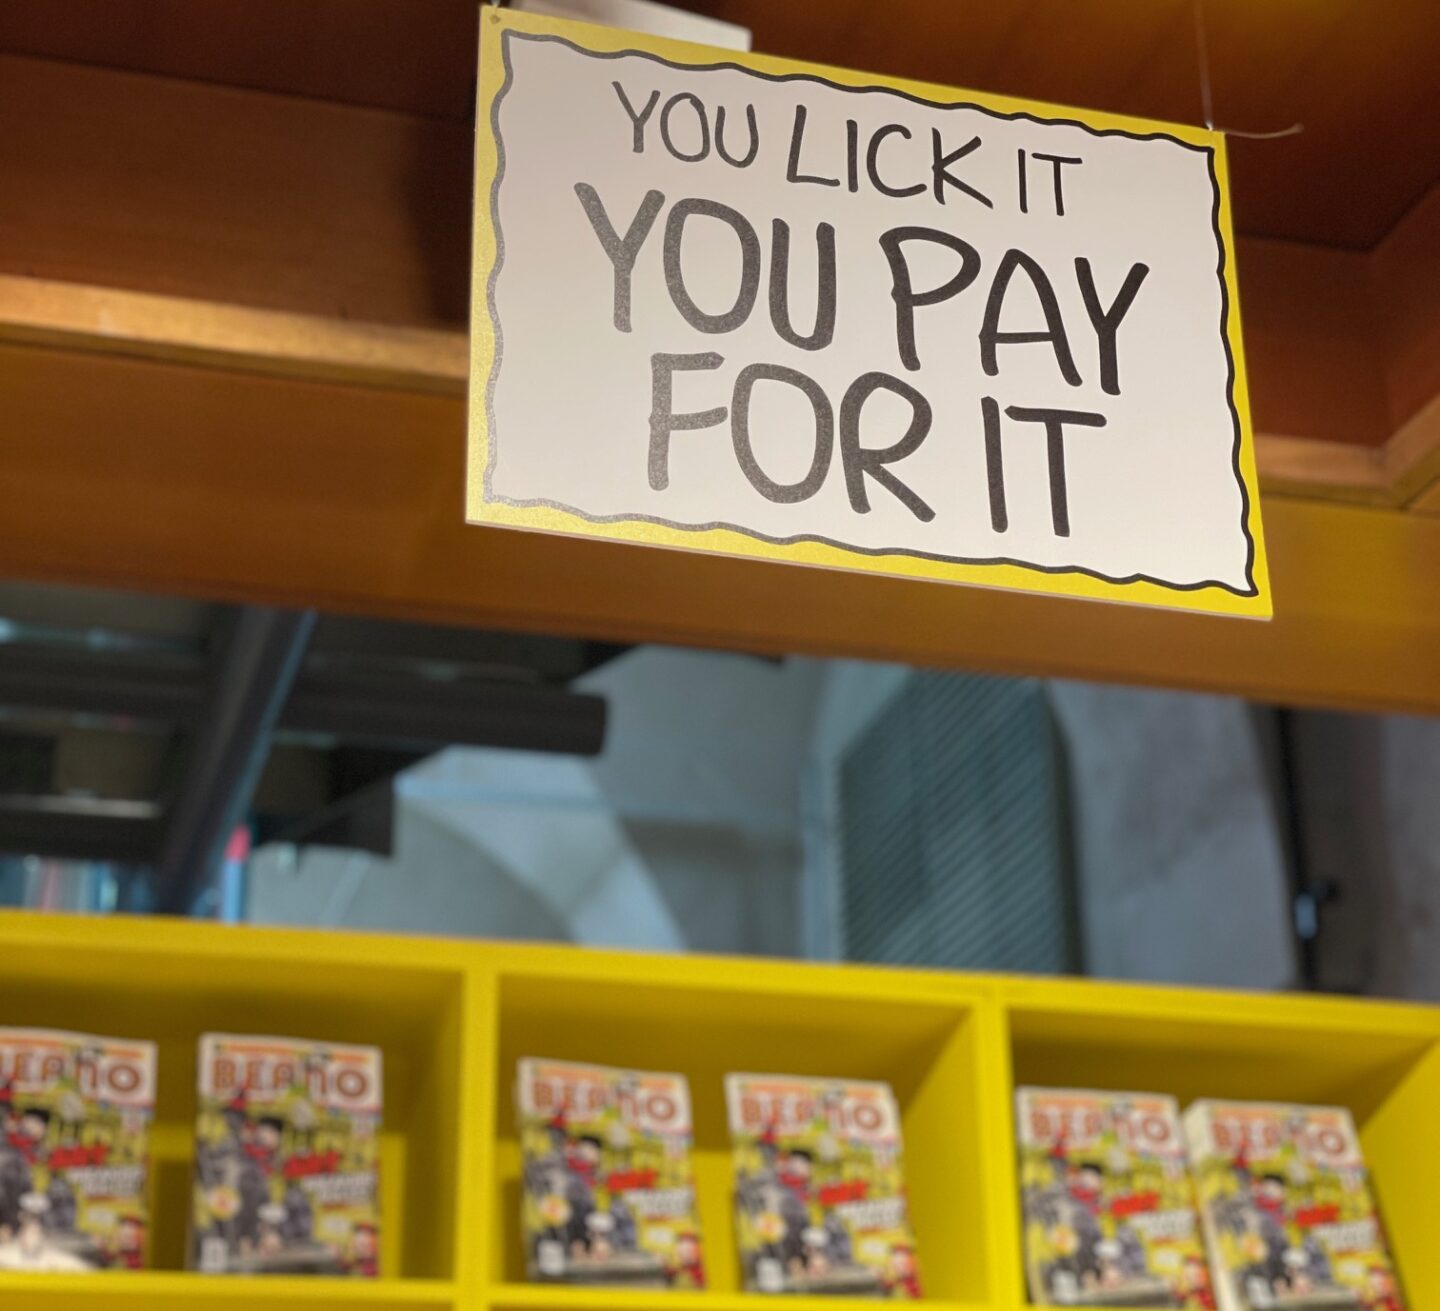 You lick it you pay for it - The Beano exhibition in London